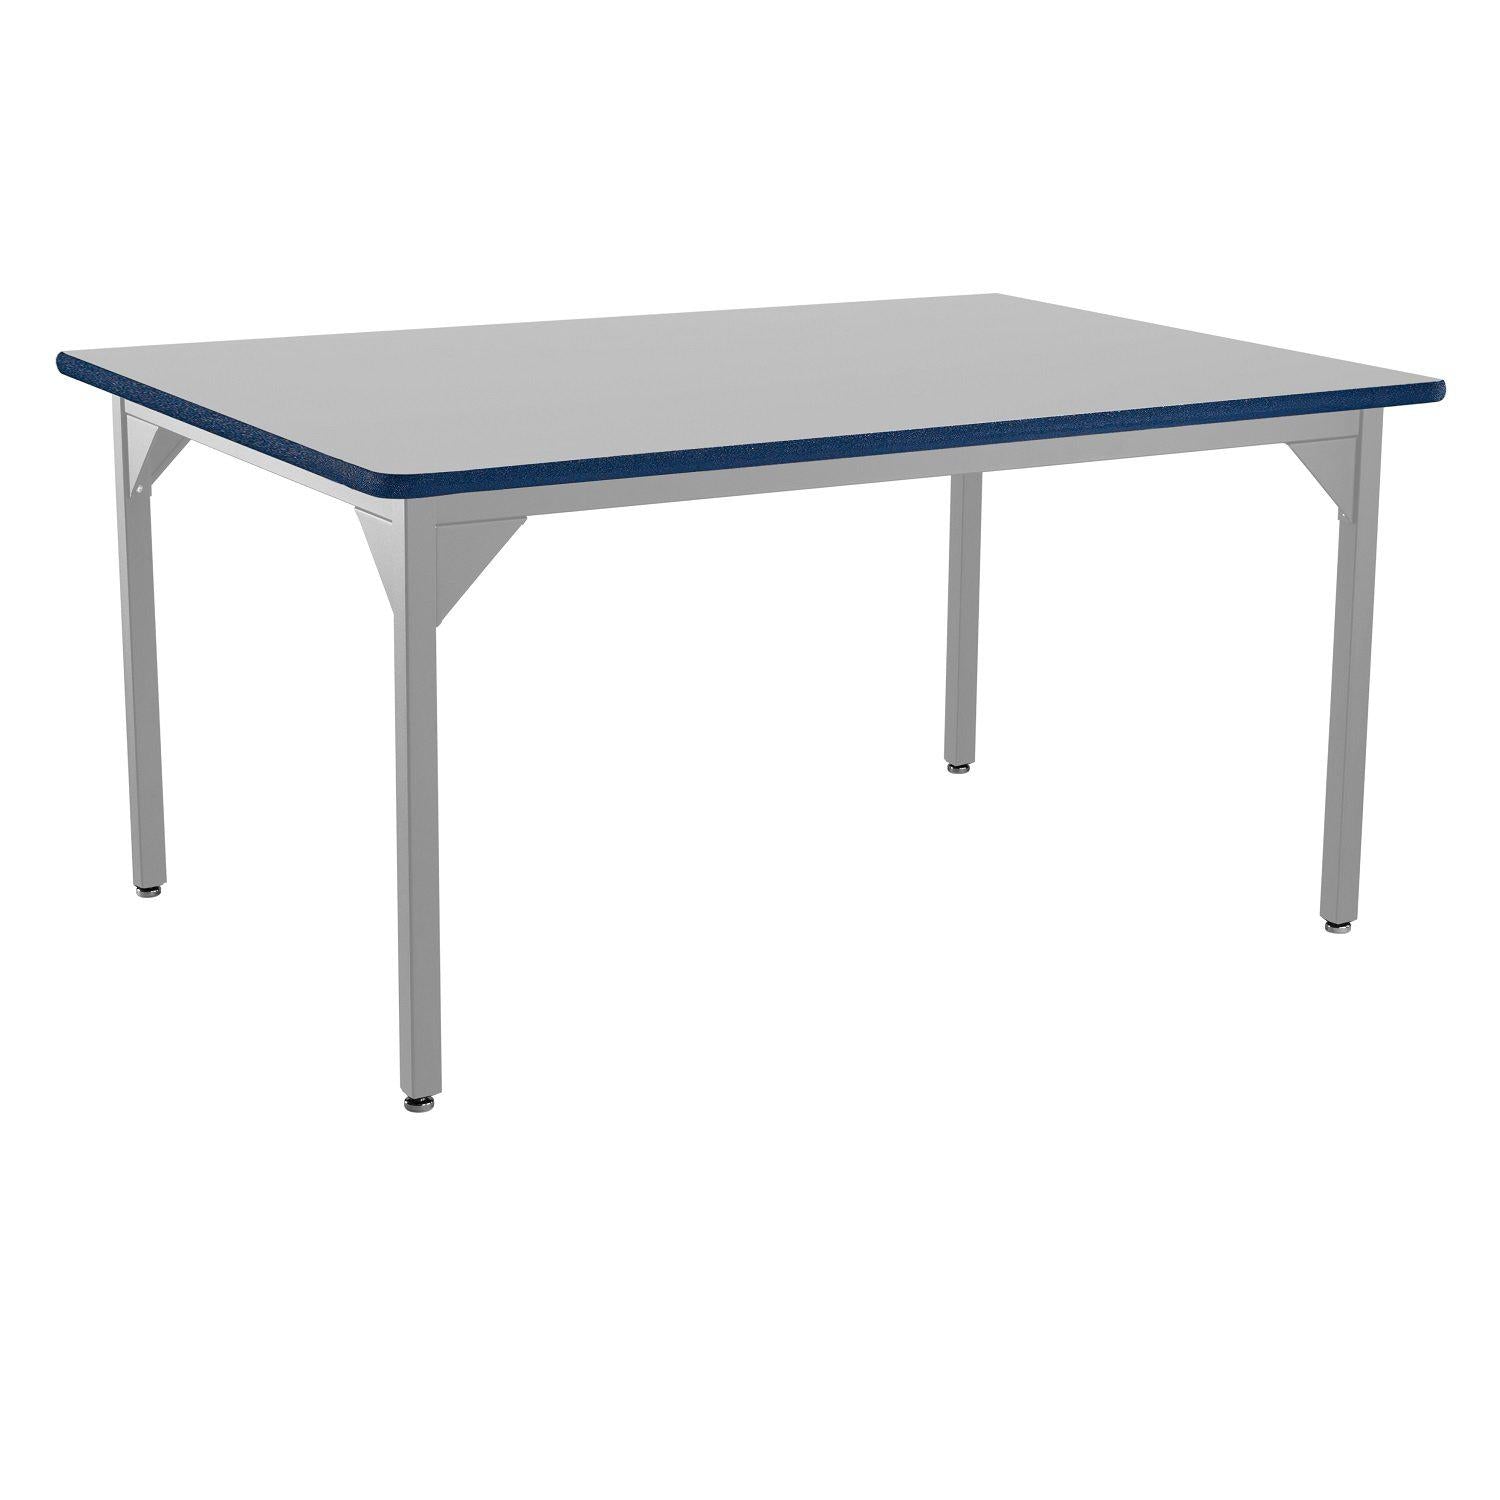 Heavy-Duty Fixed Height Utility Table, Soft Grey Frame, 42" x 60", Supreme High-Pressure Laminate Top with Black ProtectEdge